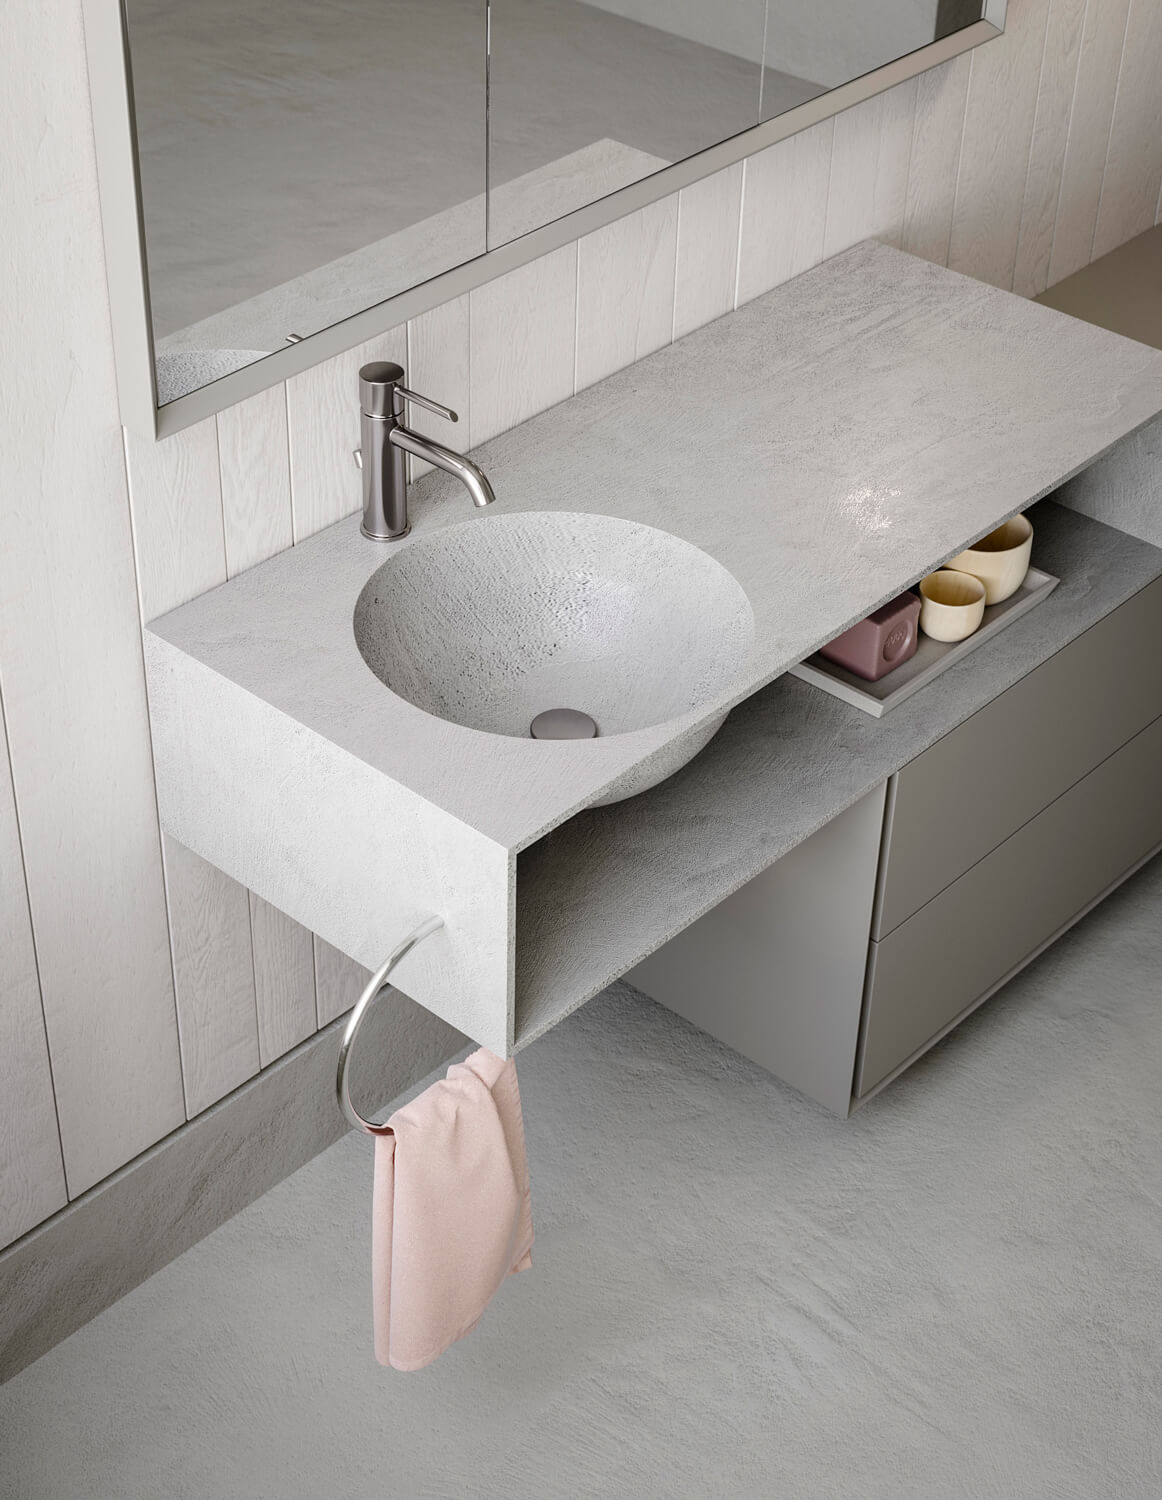 A thick steel ring mounted on the top functions as towel rail. Integrated Pianeta washbasin.